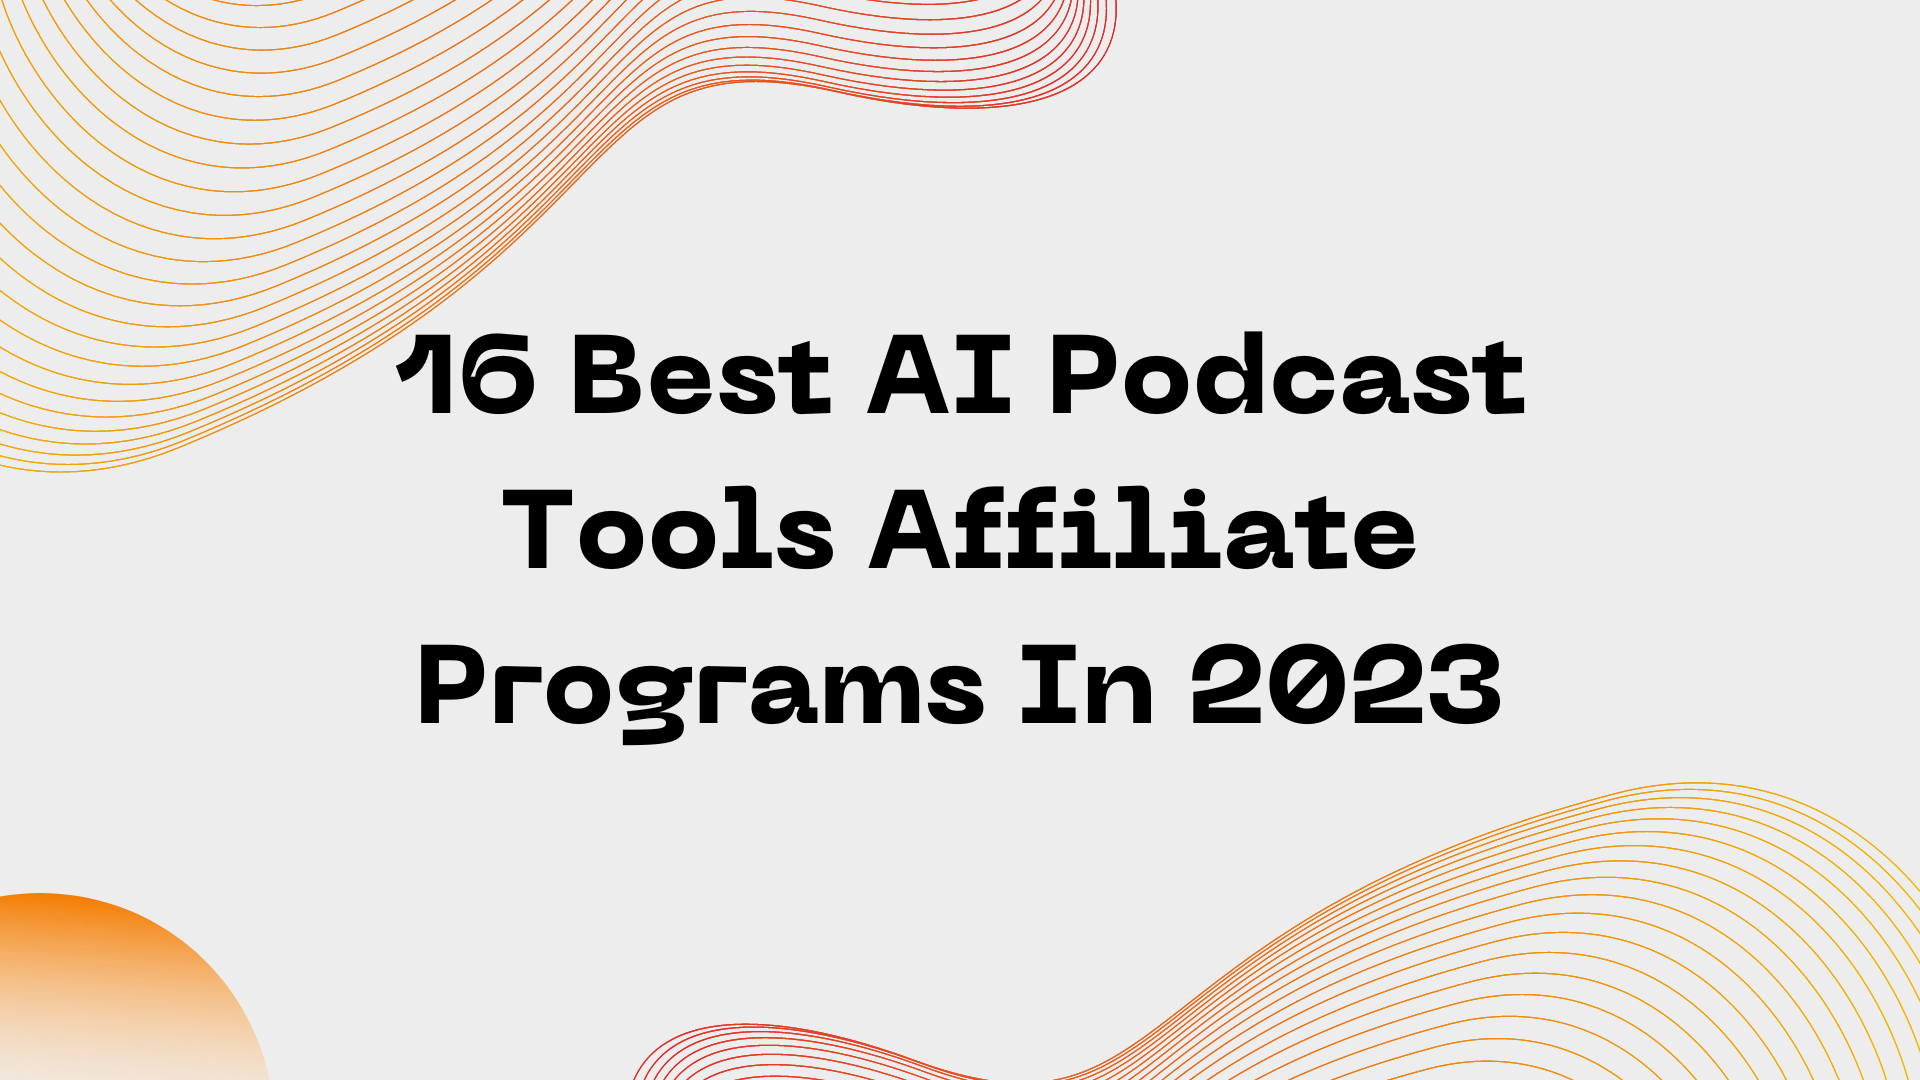 16 Best AI Podcast Tools Affiliate Programs In 2023